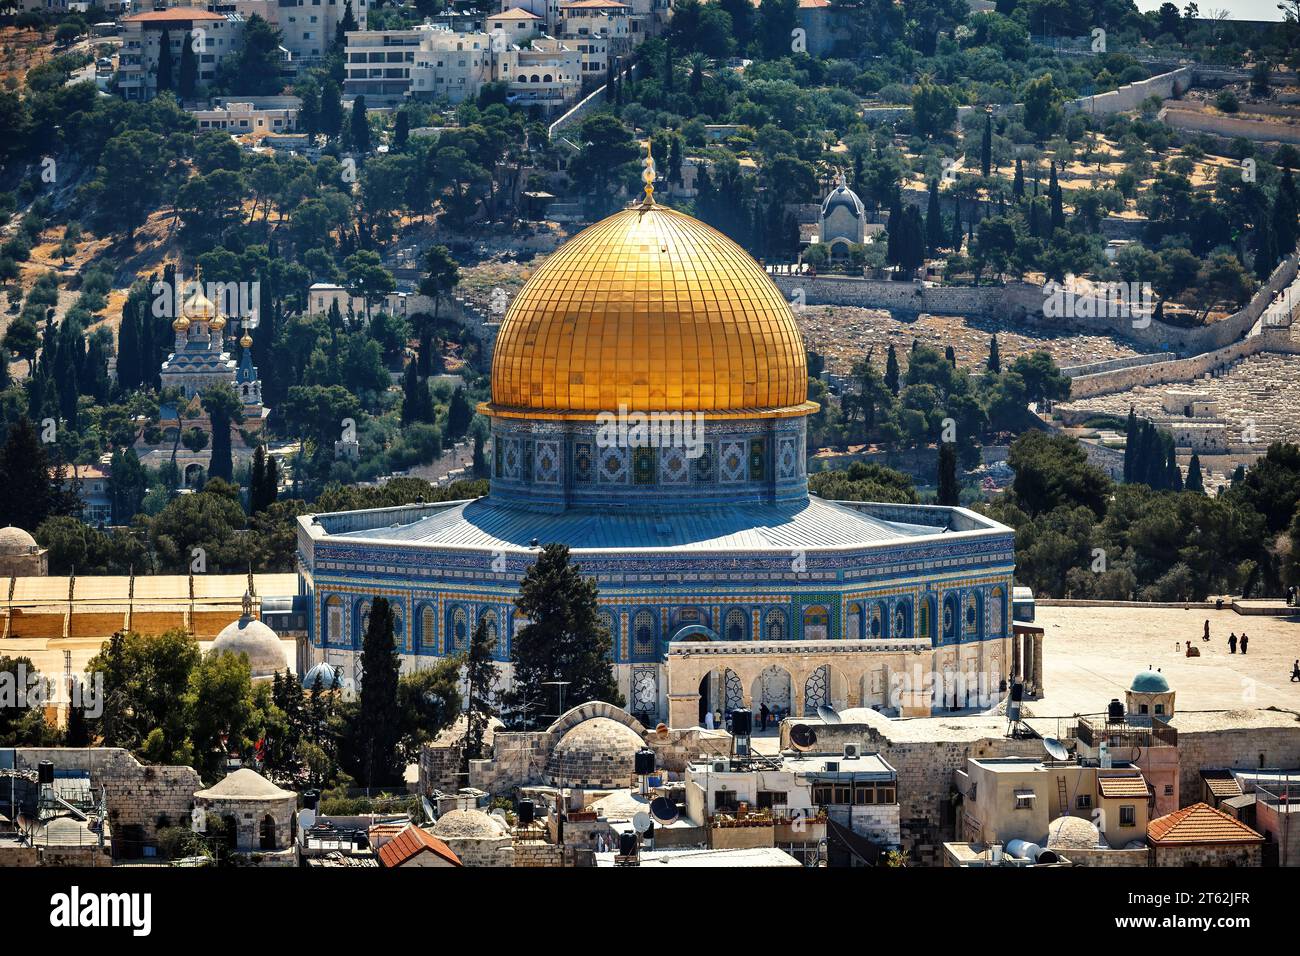 Aerial view of the famous Dome of the Rock on the Temple Mount in Old City of Jerusalem, Israel. Stock Photo